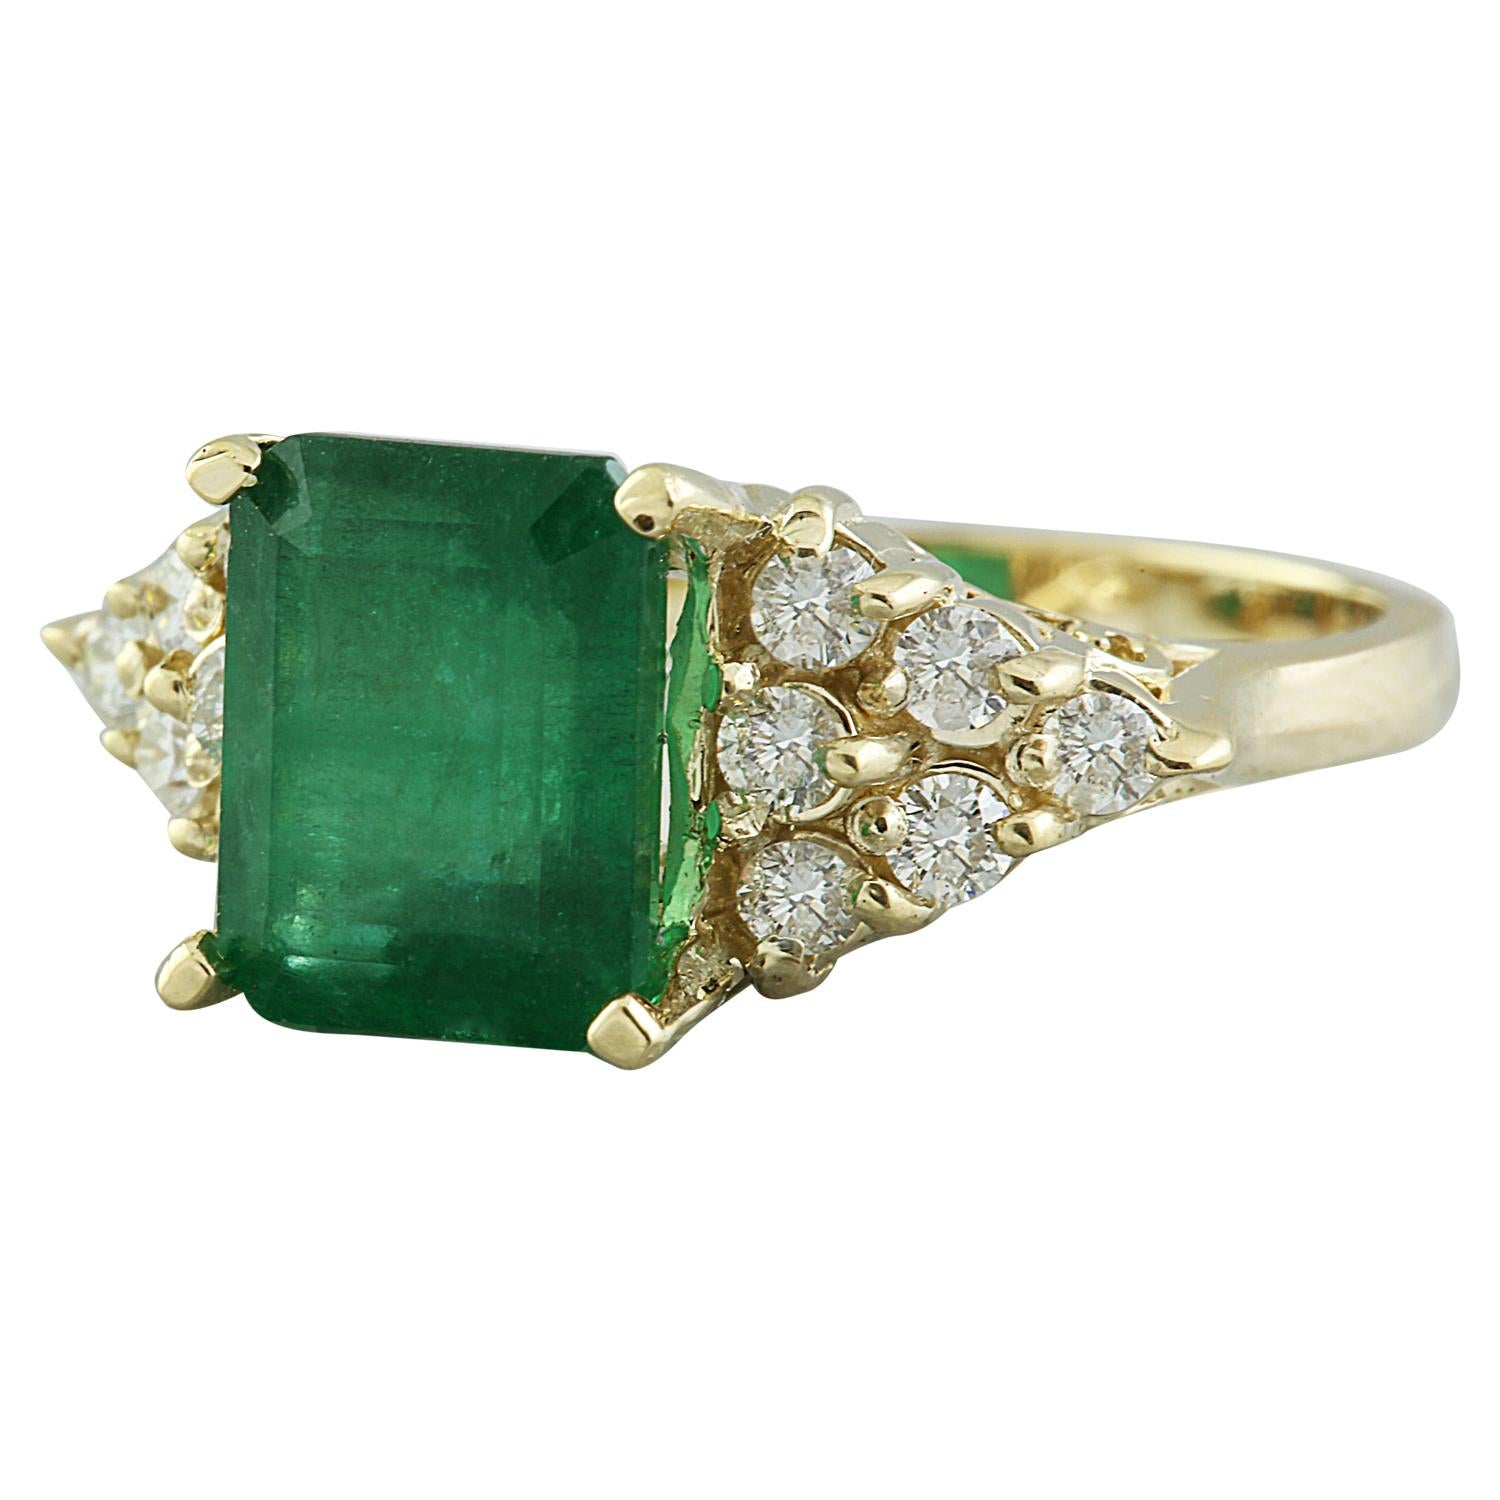 3.32 Carat Natural Emerald 14 Karat Solid Yellow Gold Diamond Ring
Stamped: 14K 
Total Ring Weight: 4.1 Grams
Emerald Weight: 2.82 Carat (9.00x7.00 Millimeters) 
Quantity: 1
Shape: Emerald
Color: Green
Diamond Weight: 0.50 carat (F-G Color, VS2-SI1